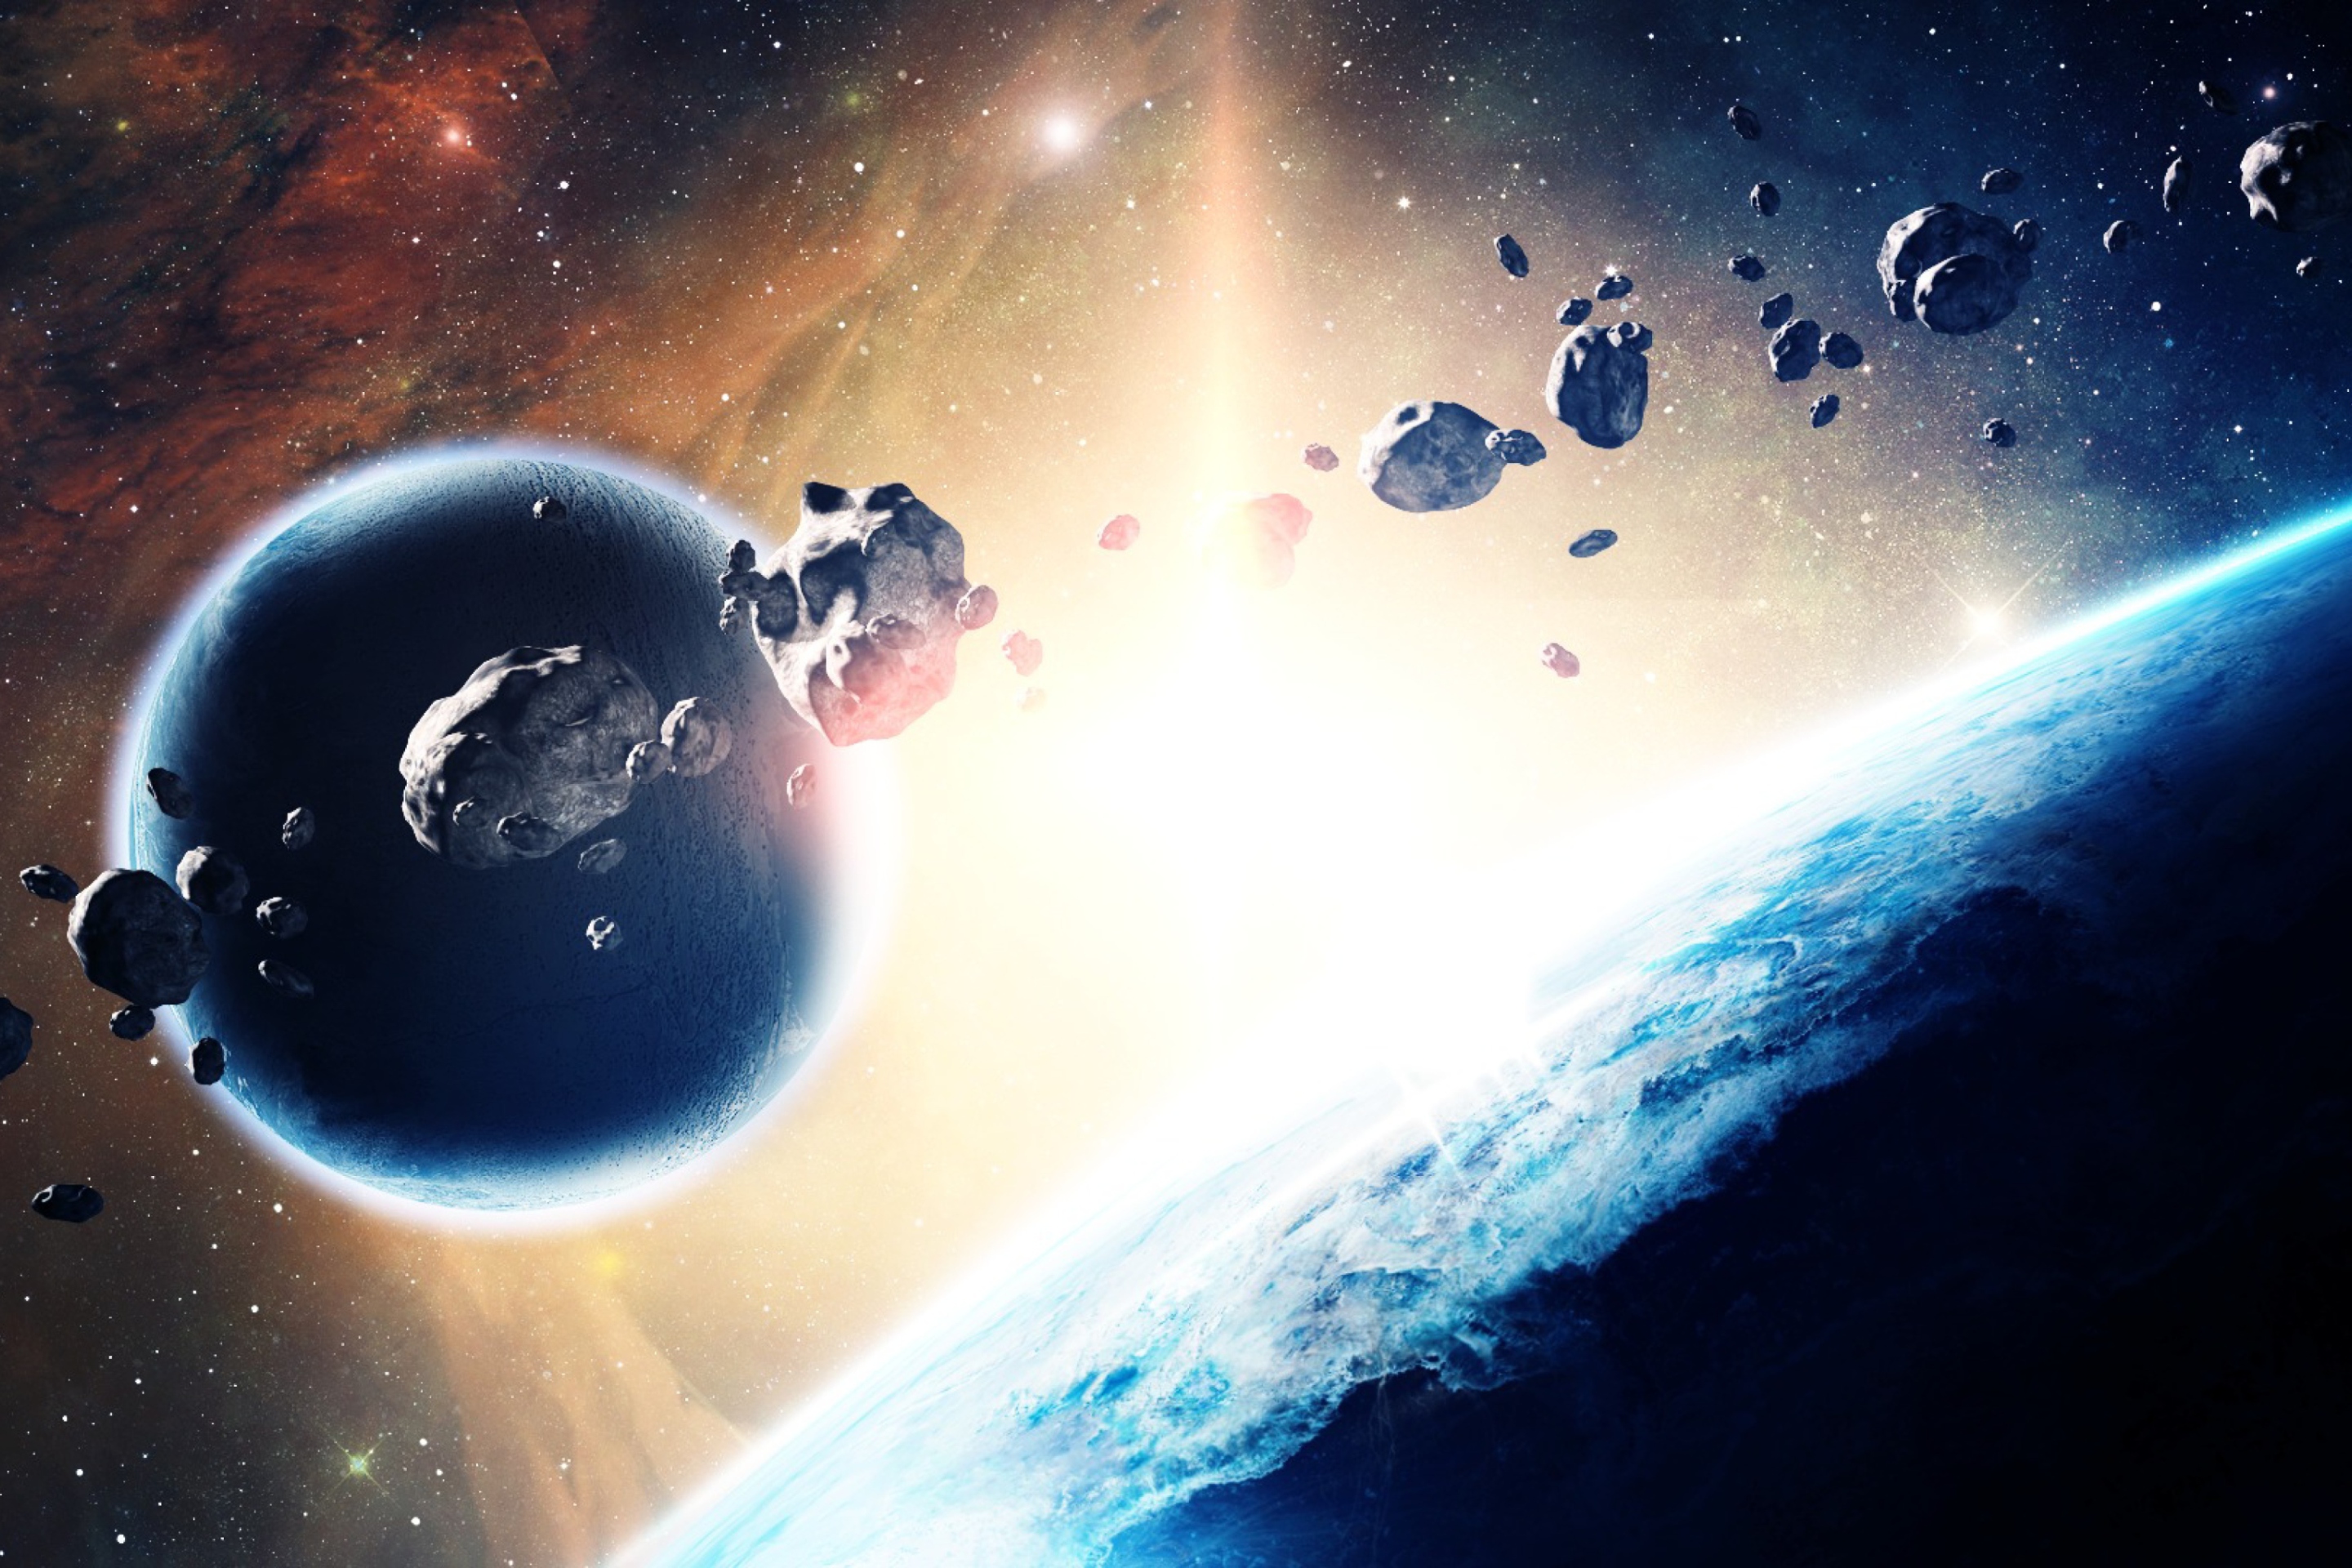 Asteroids In Space wallpaper 2880x1920